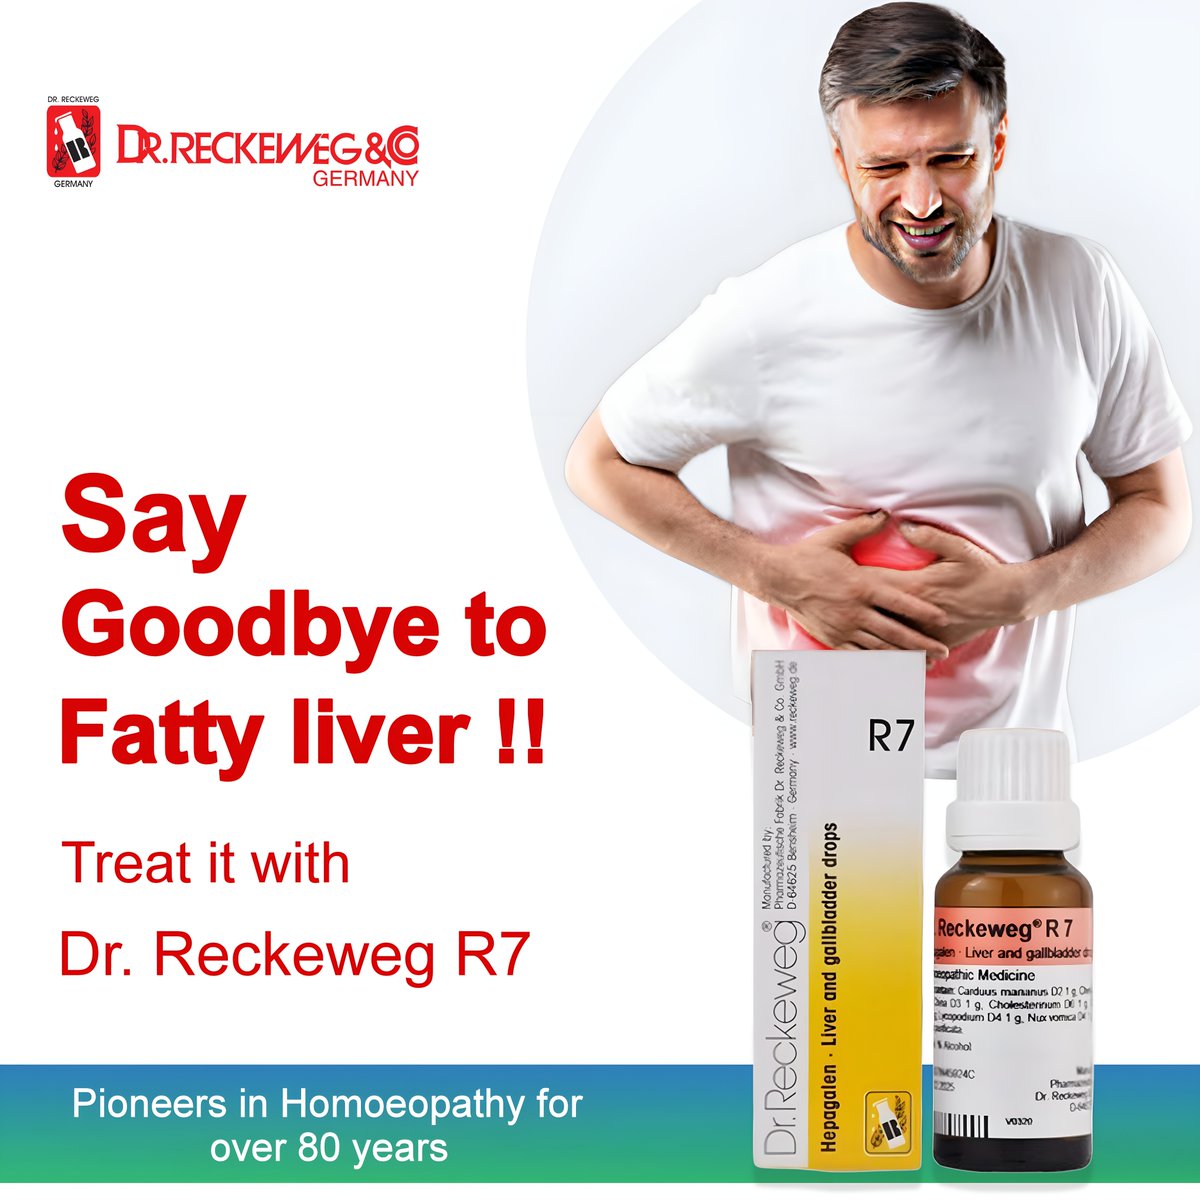 Swelling of the liver with sensation of pressure on liver? Cure it with Dr. Reckeweg R7
.
Buy online at reckeweg-india.com
.
#drreckewegR7 #Fattyliver #liverproblems #fattyliverdisease #homoeopathy